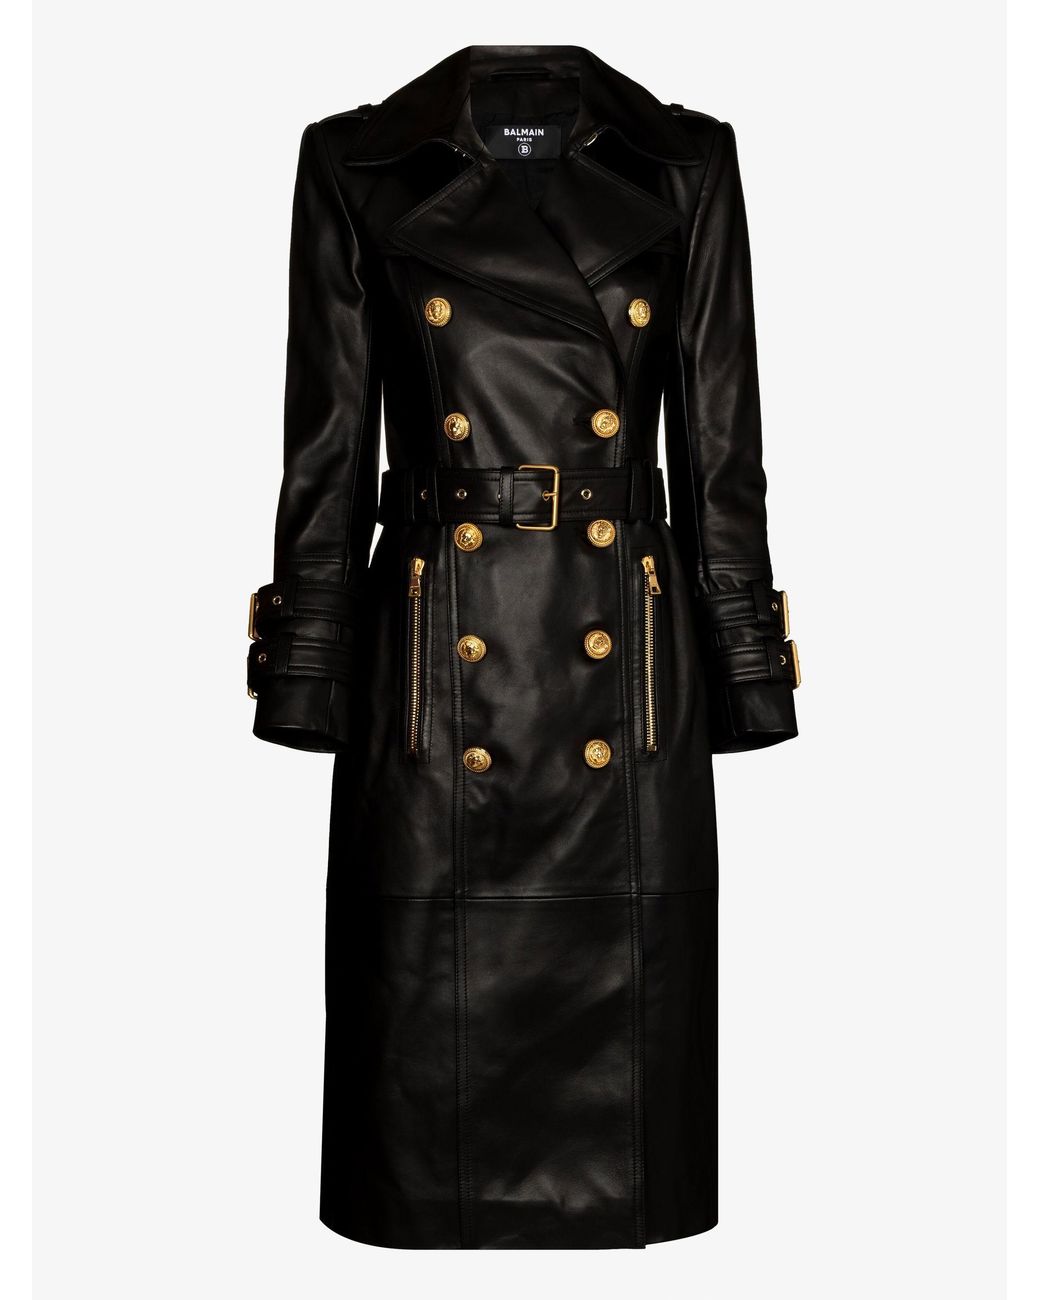 Balmain Belted Leather Trench Coat in Black | Lyst